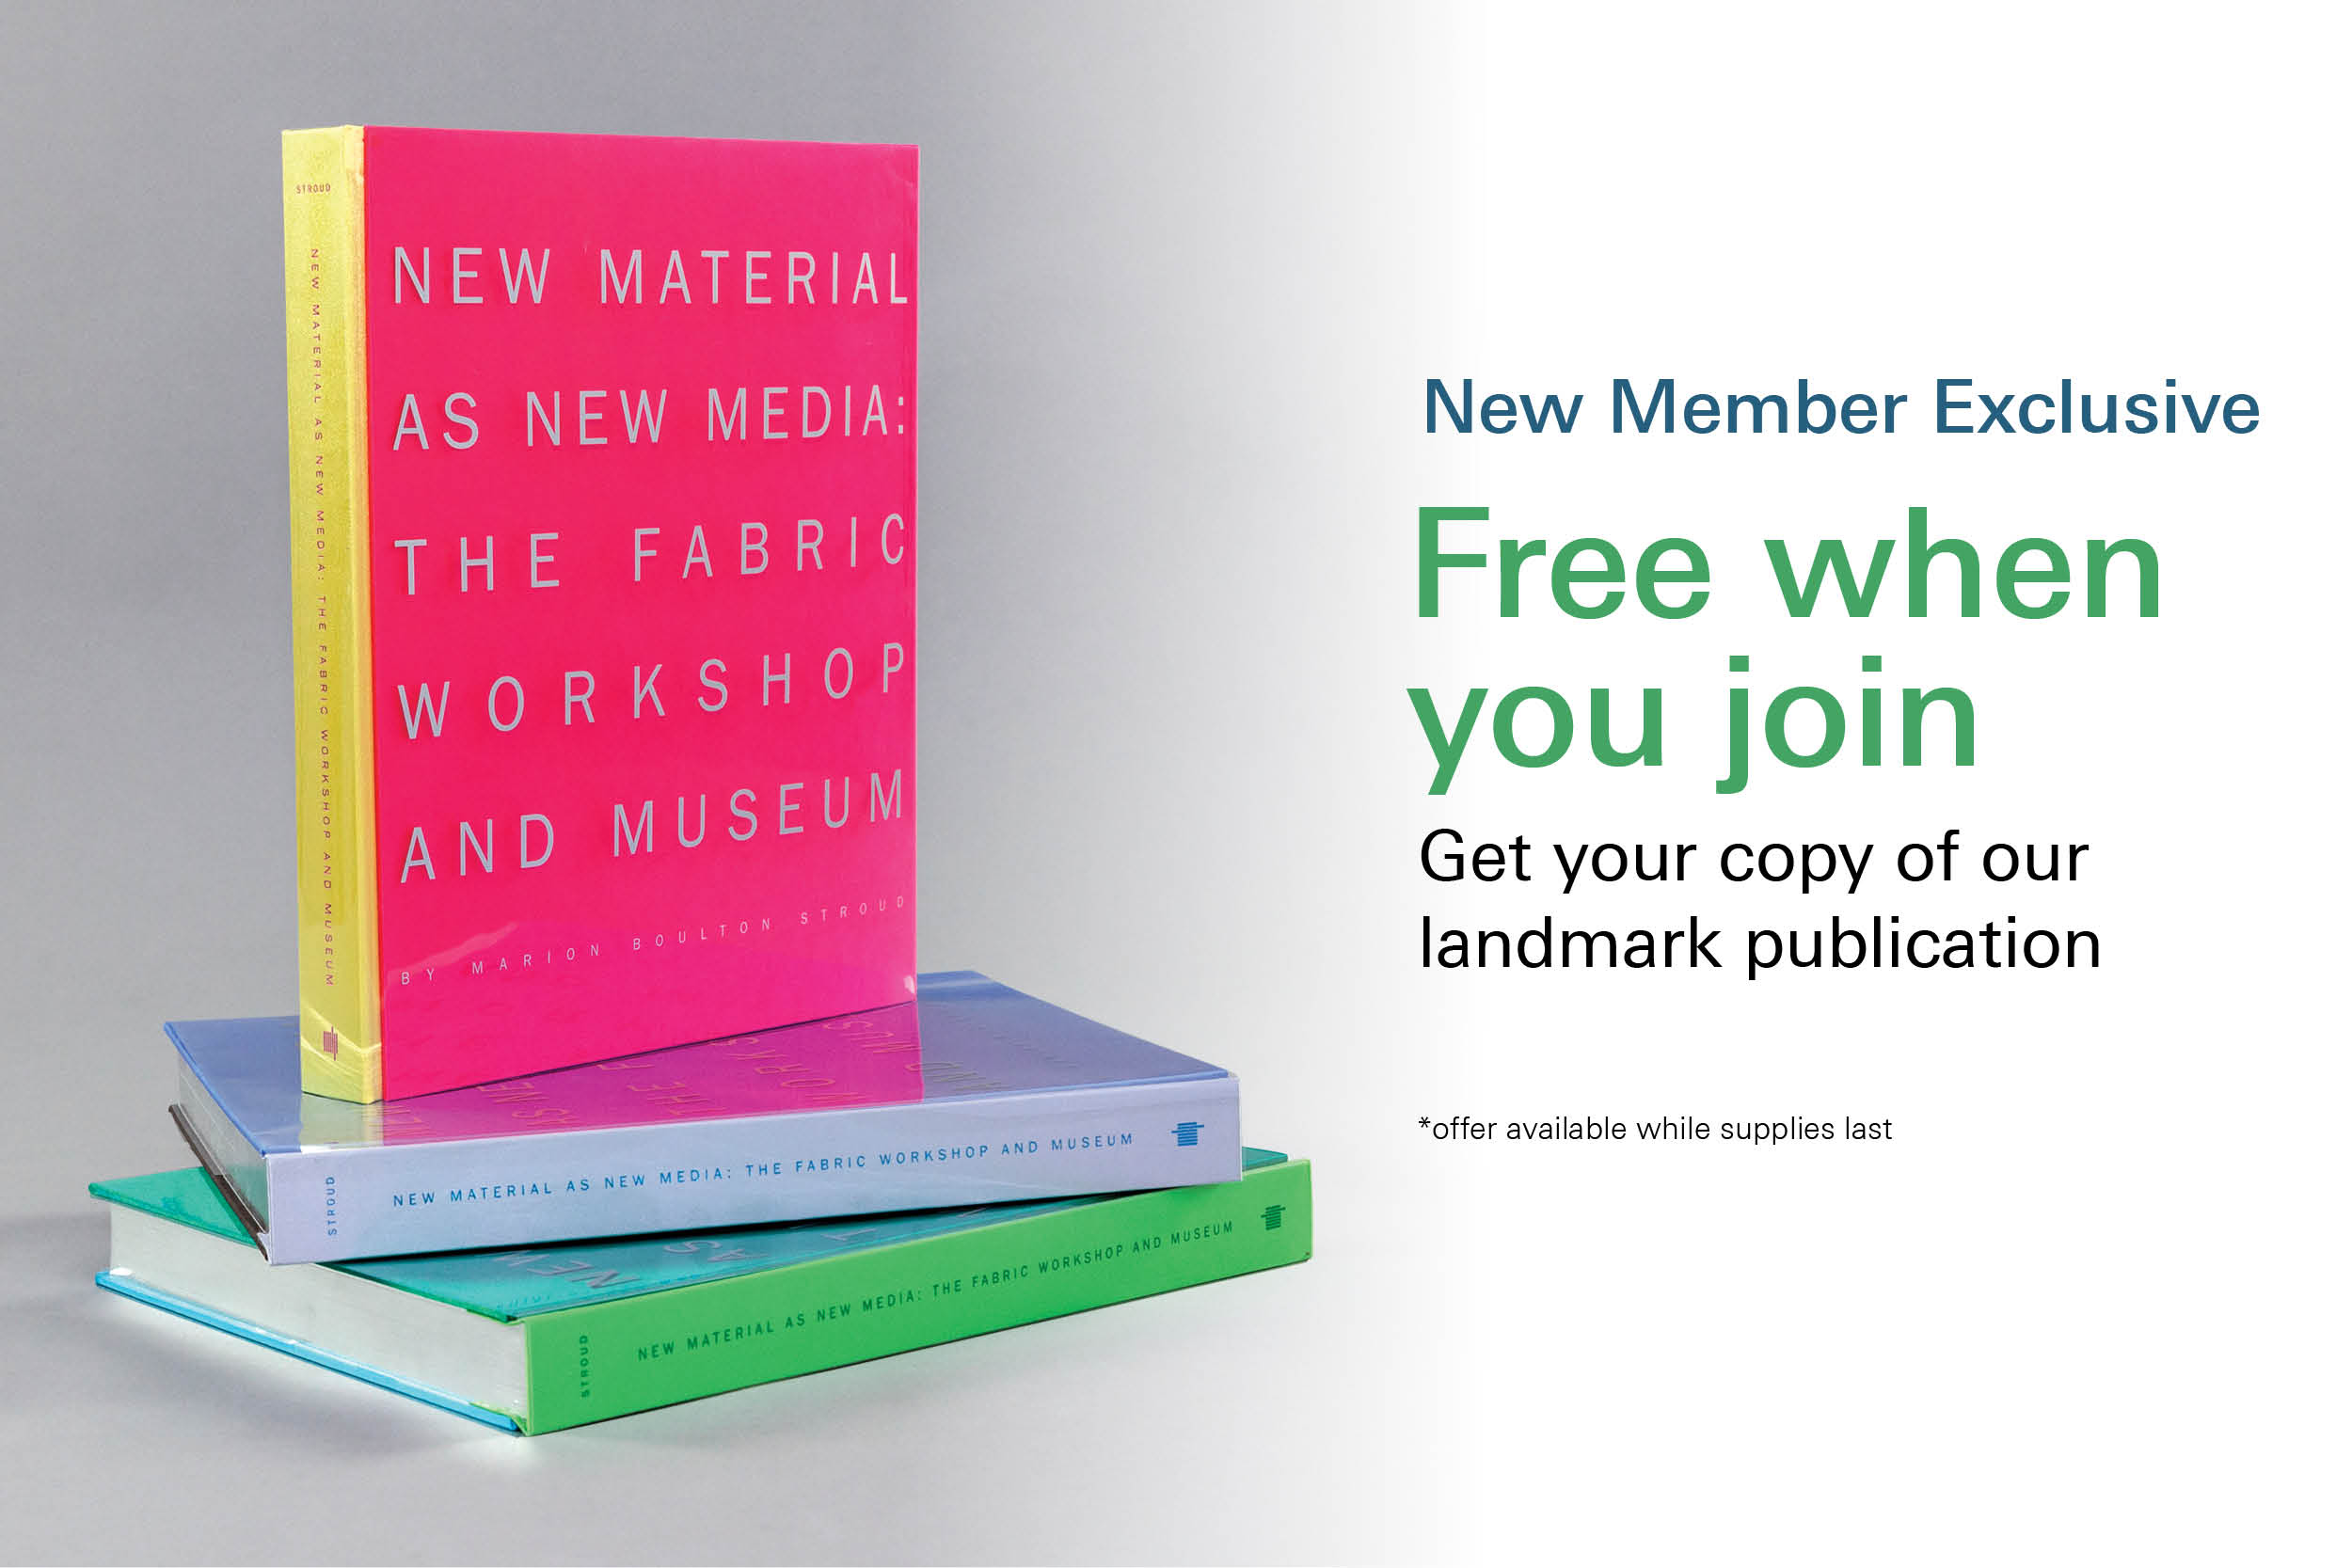 New member exclusive: Get a free copy of our landmark publication when you join.